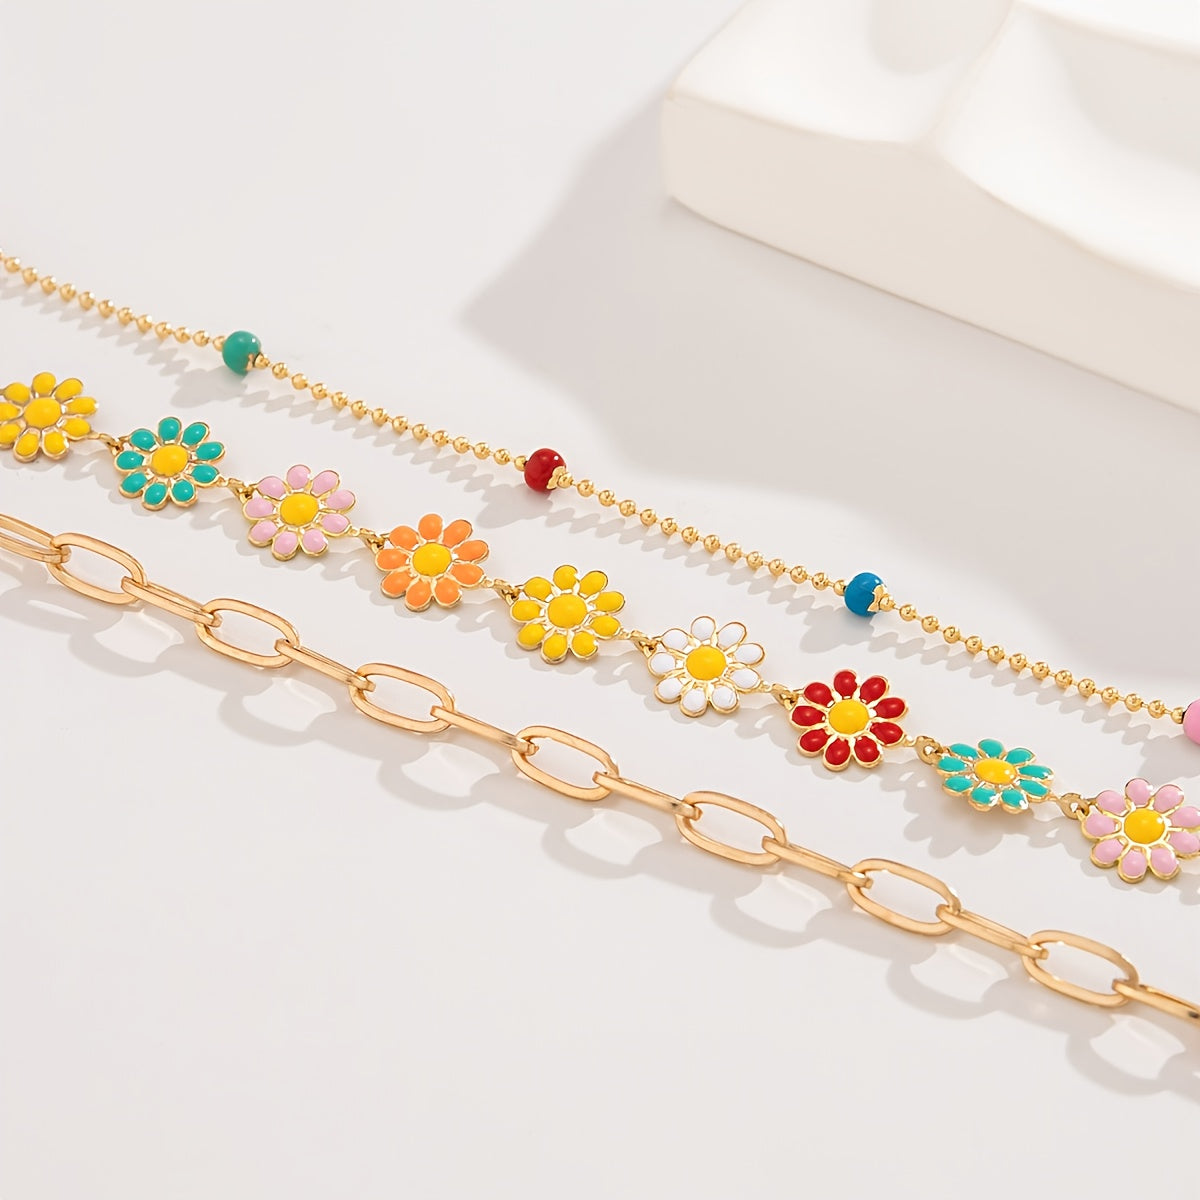 Add a Pop of Personality to Your Look with our Multicolor Sunflower Flower Decor Necklace Set